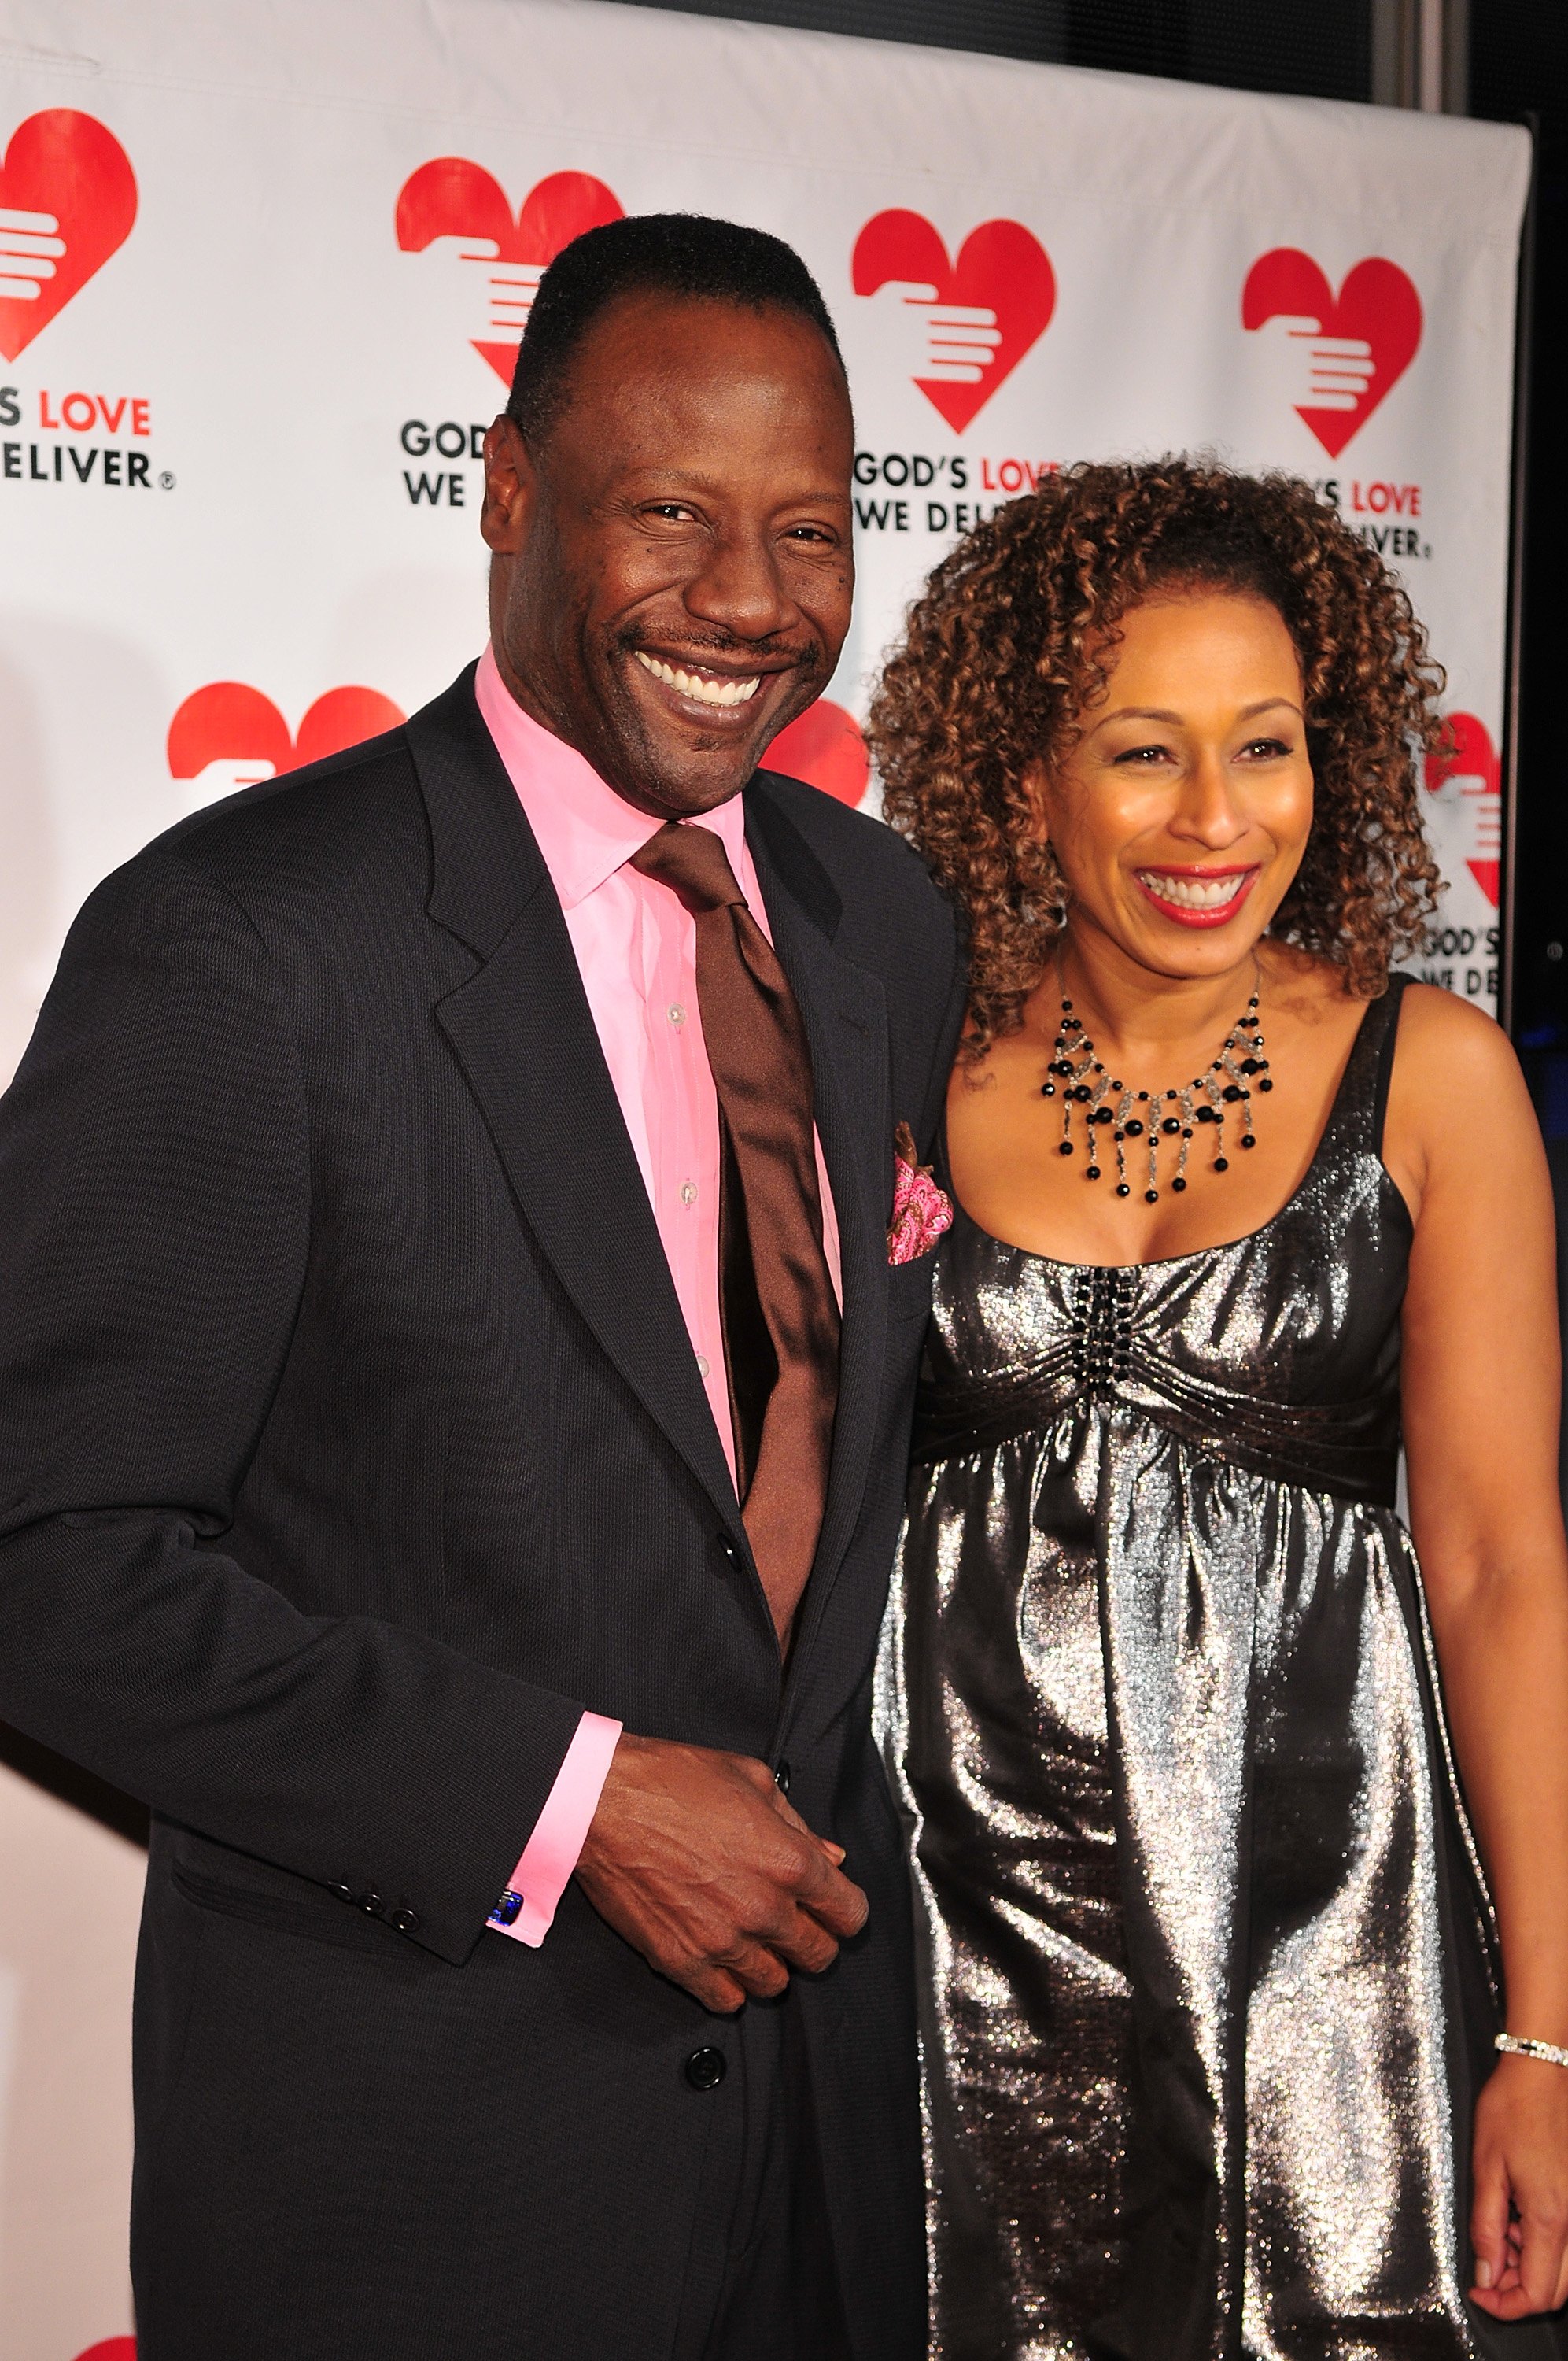 Actress Tamara Tunie and husband Gregory Generet attend the 2009 Golden Heart awards at the IAC Building on October 19, 2009 in New York City. | Photo: Getty Images